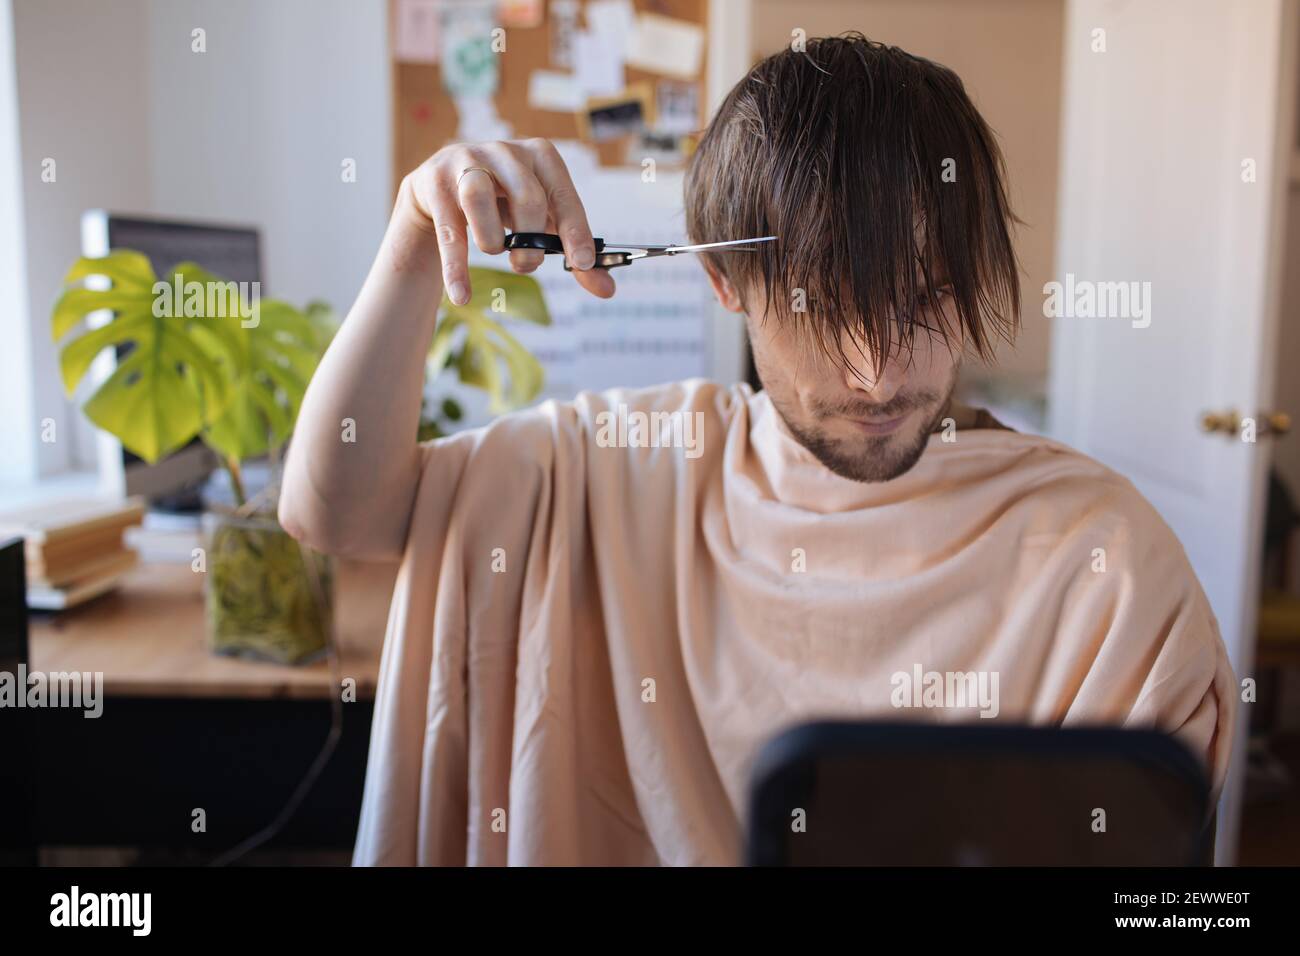 Home haircut. Man cutting hair at home. Life in pandemic during lockdown. How to cut your own Hair when hairdressers are closed. Easiest Self-haircut Stock Photo